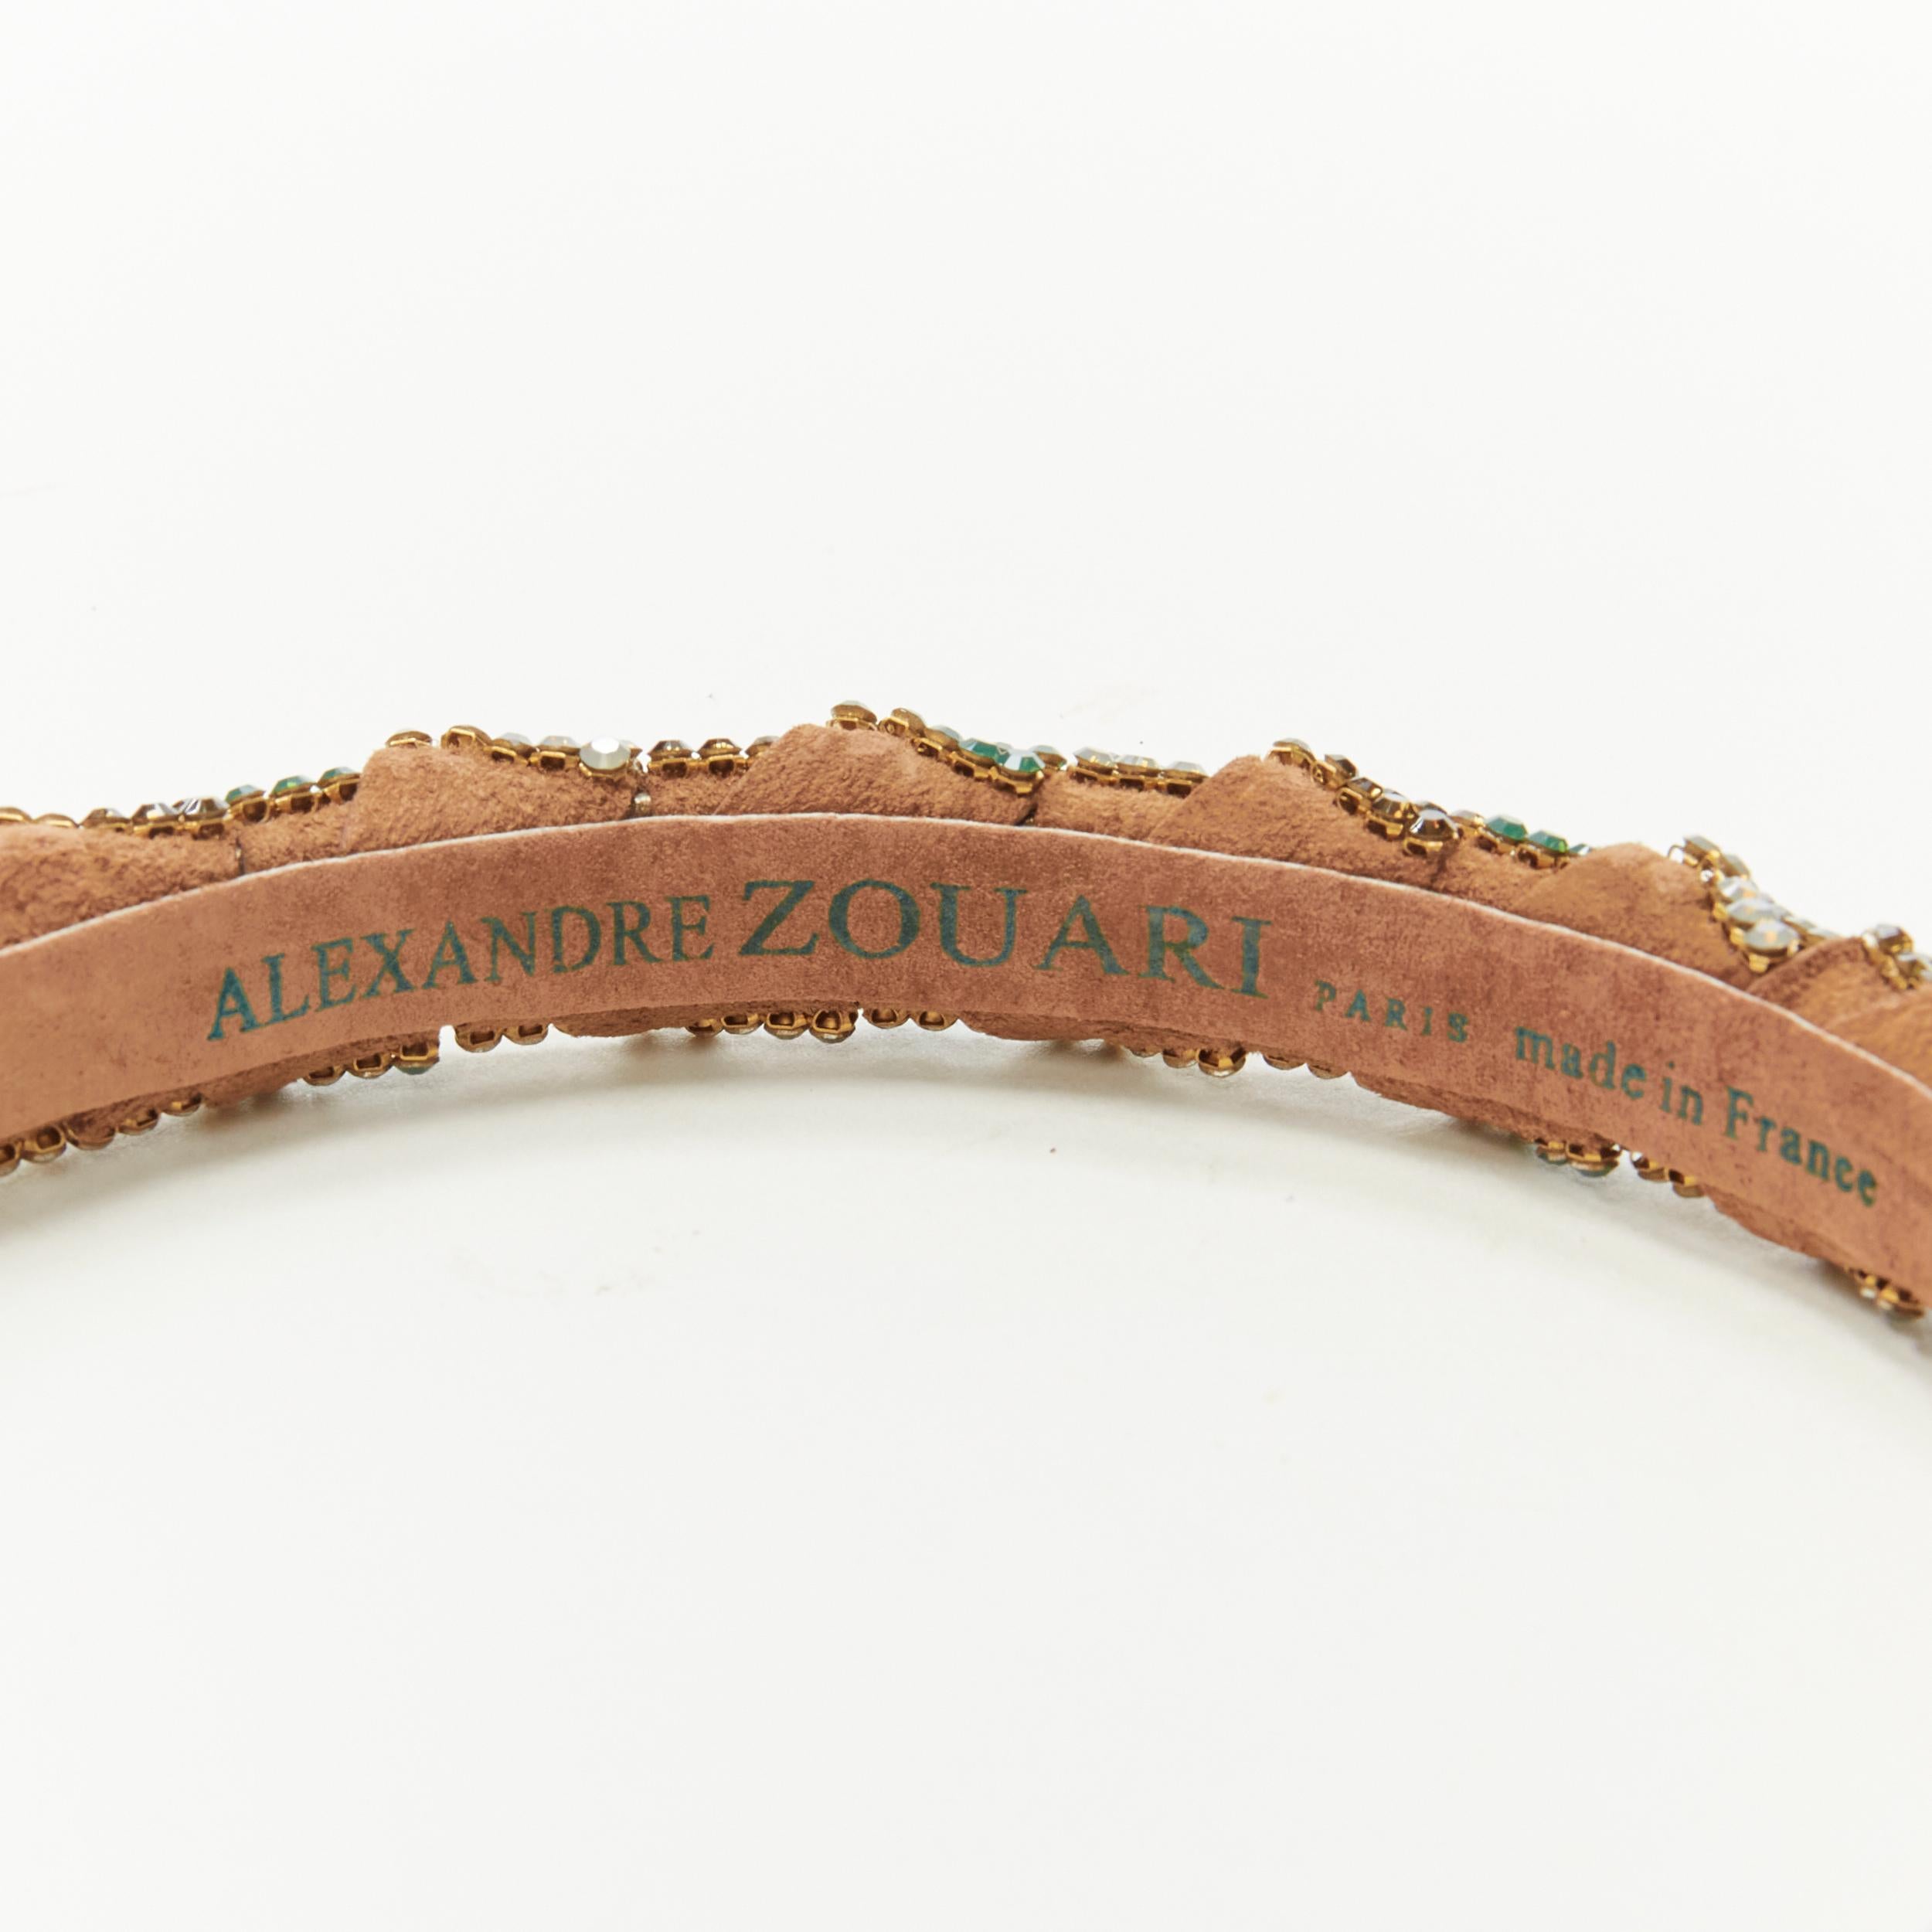 ALEXANDER ZOUARI bronze leather copper white green crystal encrusted headband For Sale 1